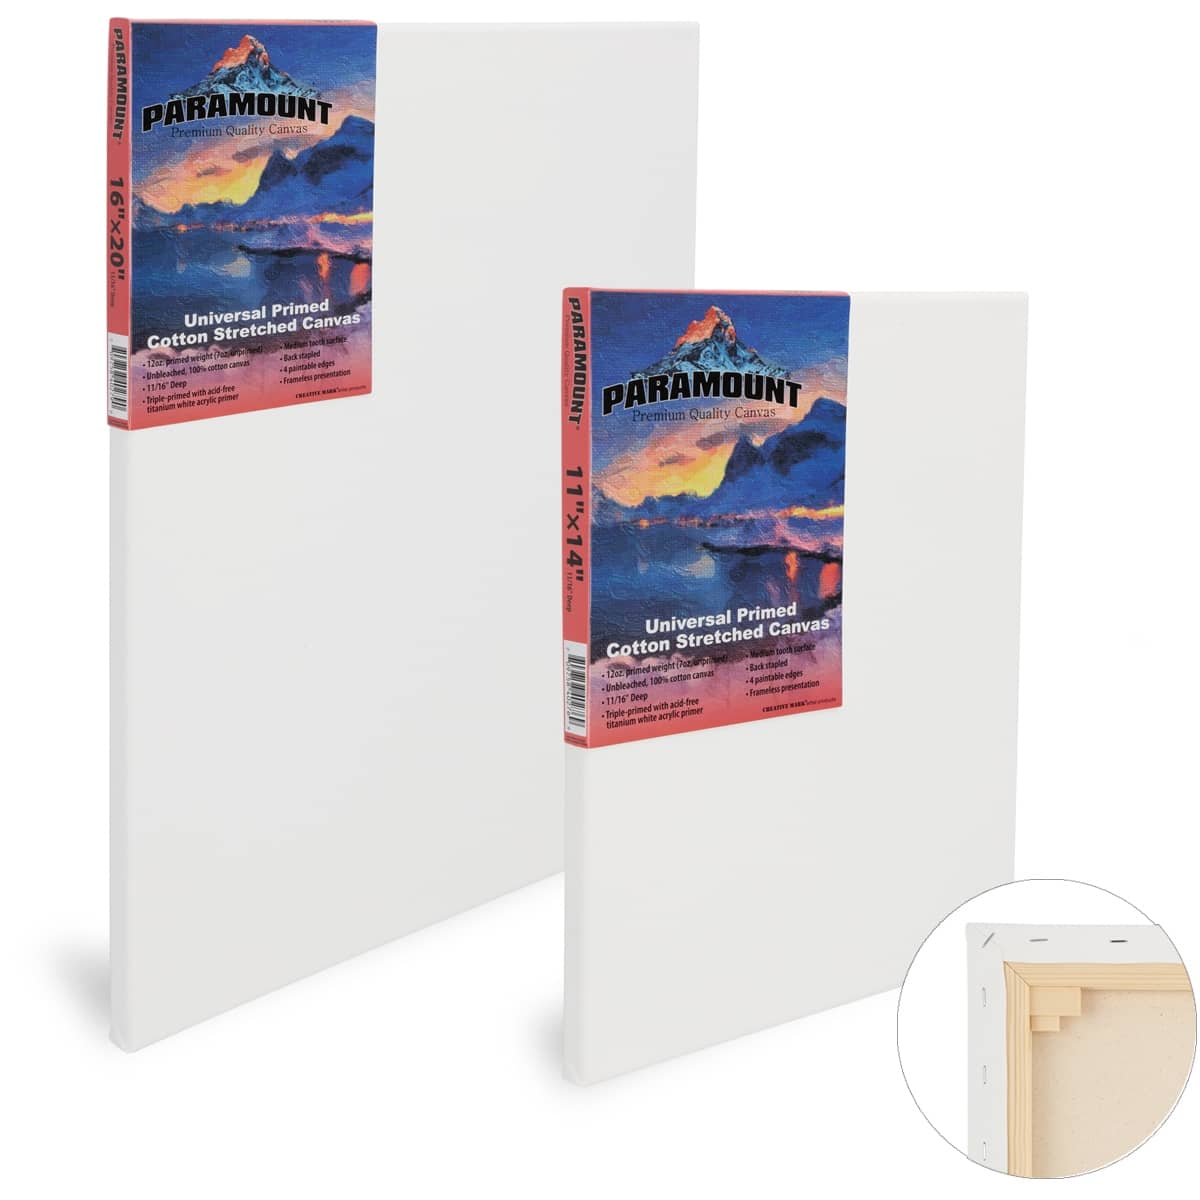 Paramount 11/16 Professional Cotton Stretched Canvas